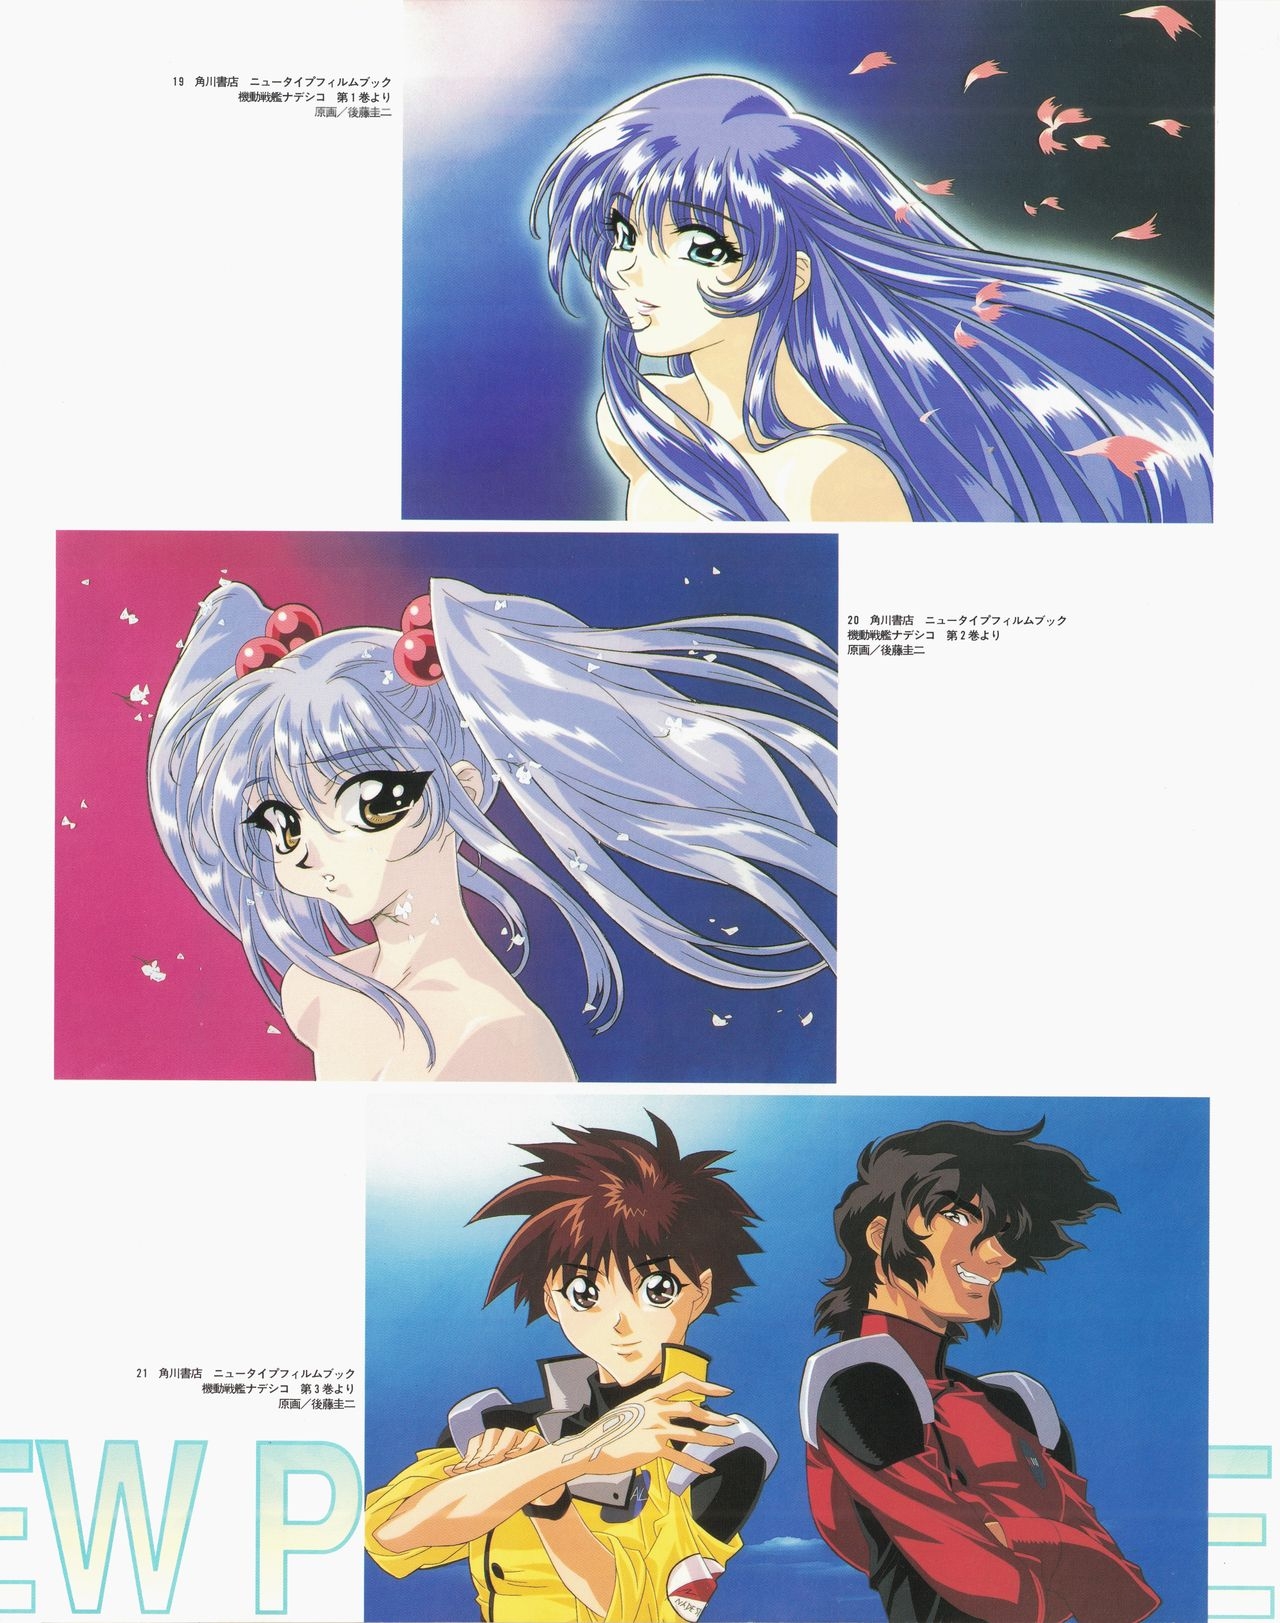 Newtype 100% Collection - Martian Successor Nadesico Perfects 31